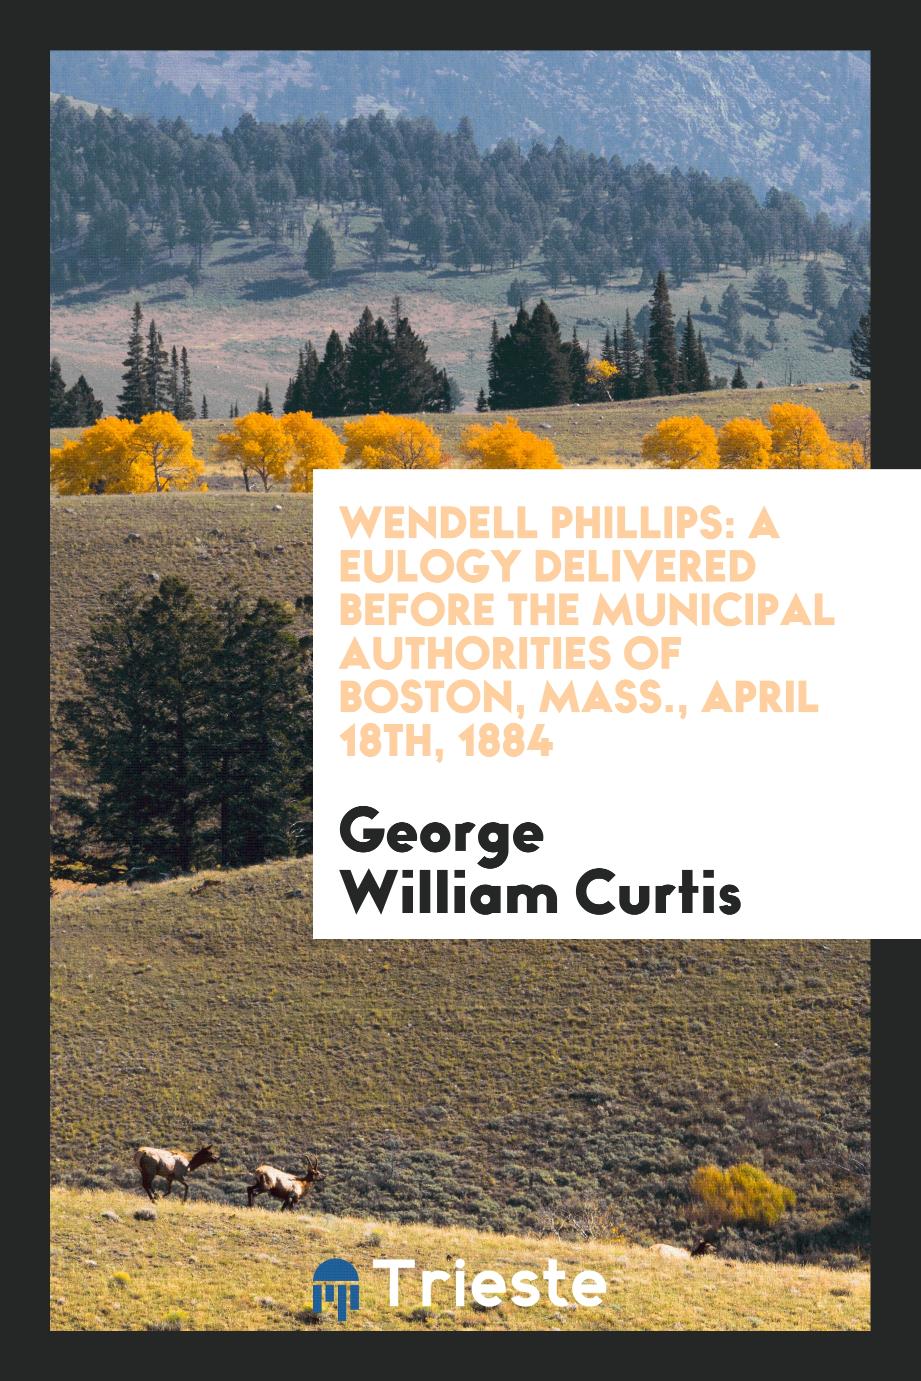 Wendell Phillips: a eulogy delivered before the municipal authorities of Boston, Mass., April 18th, 1884